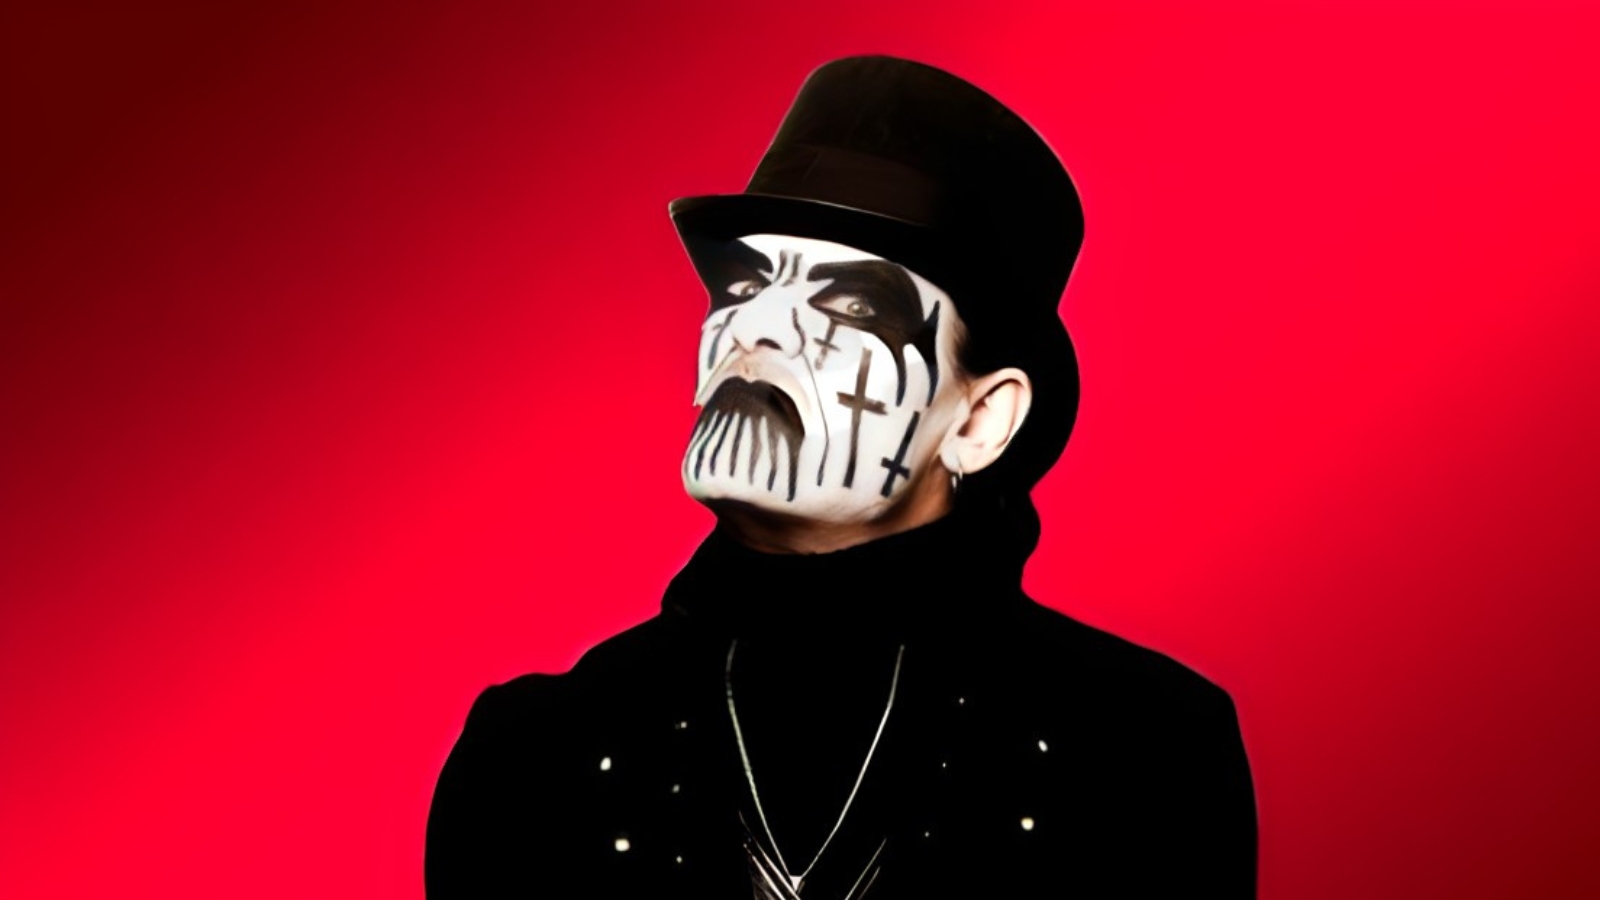 King Diamond's Corpse Paint and Spiked Gauntlets